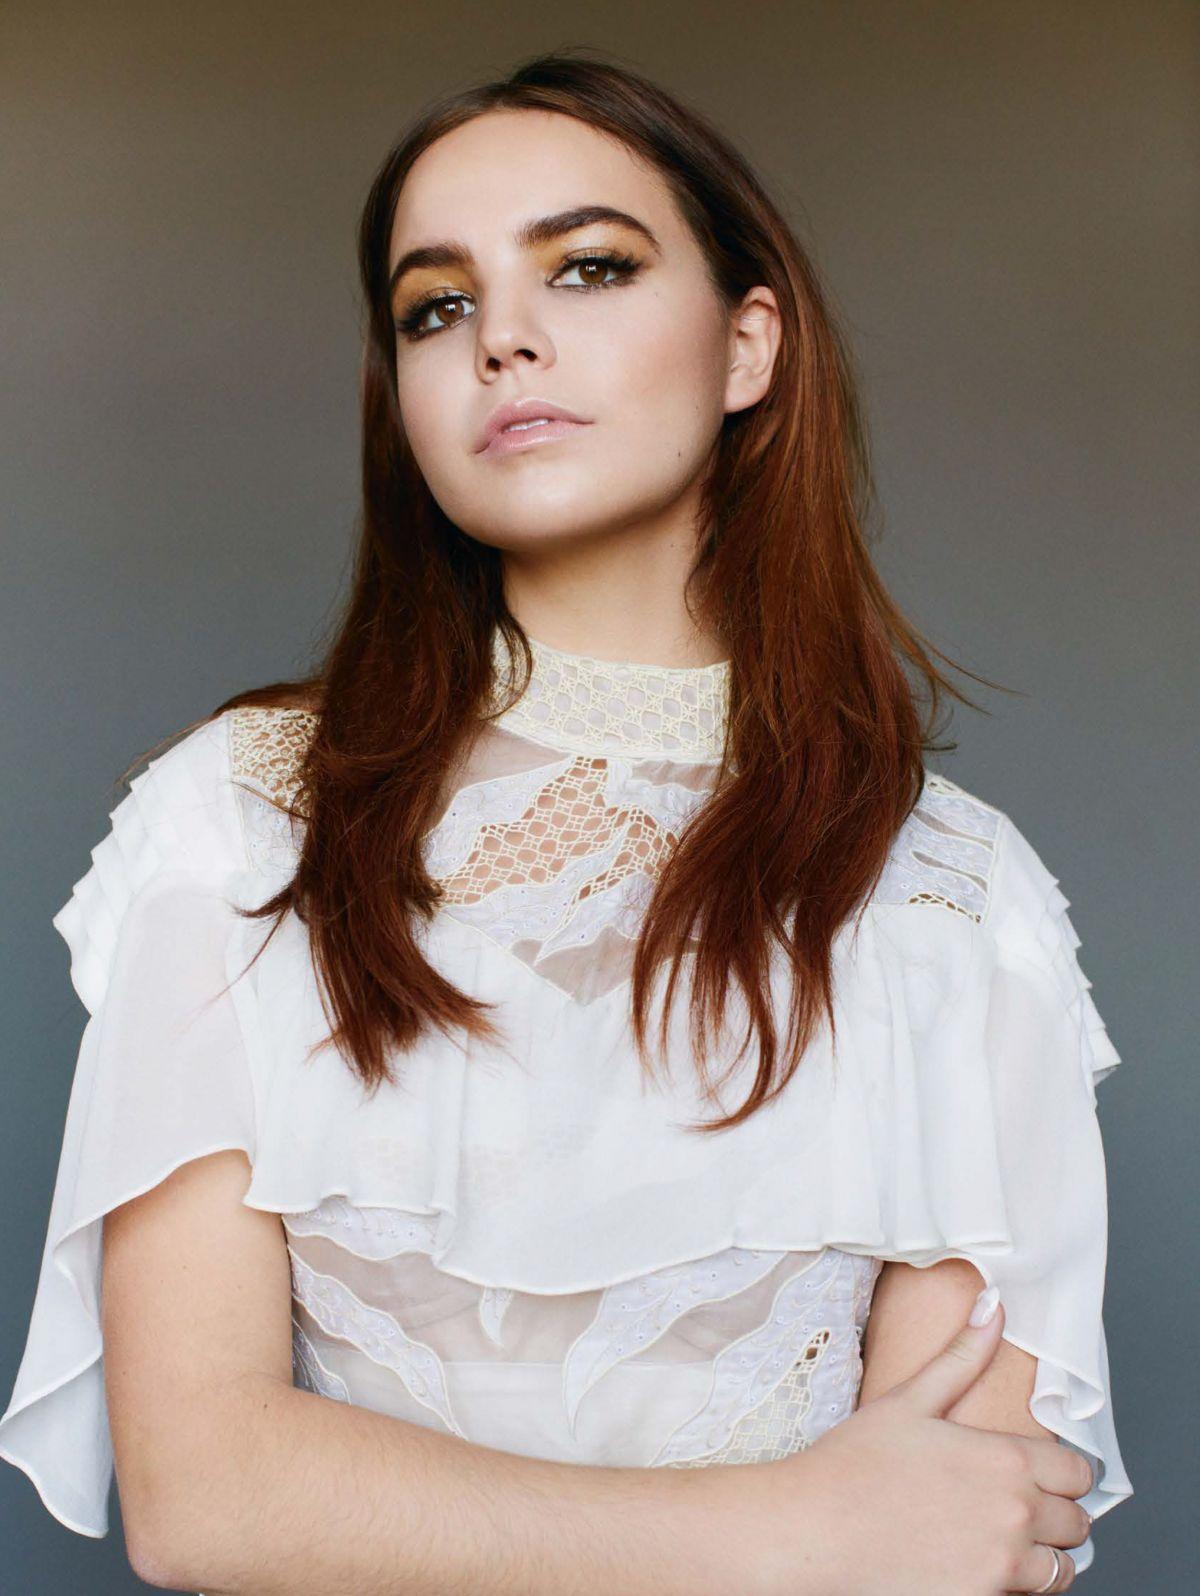 Bailee Madison image Bailee Madison HD wallpaper and background